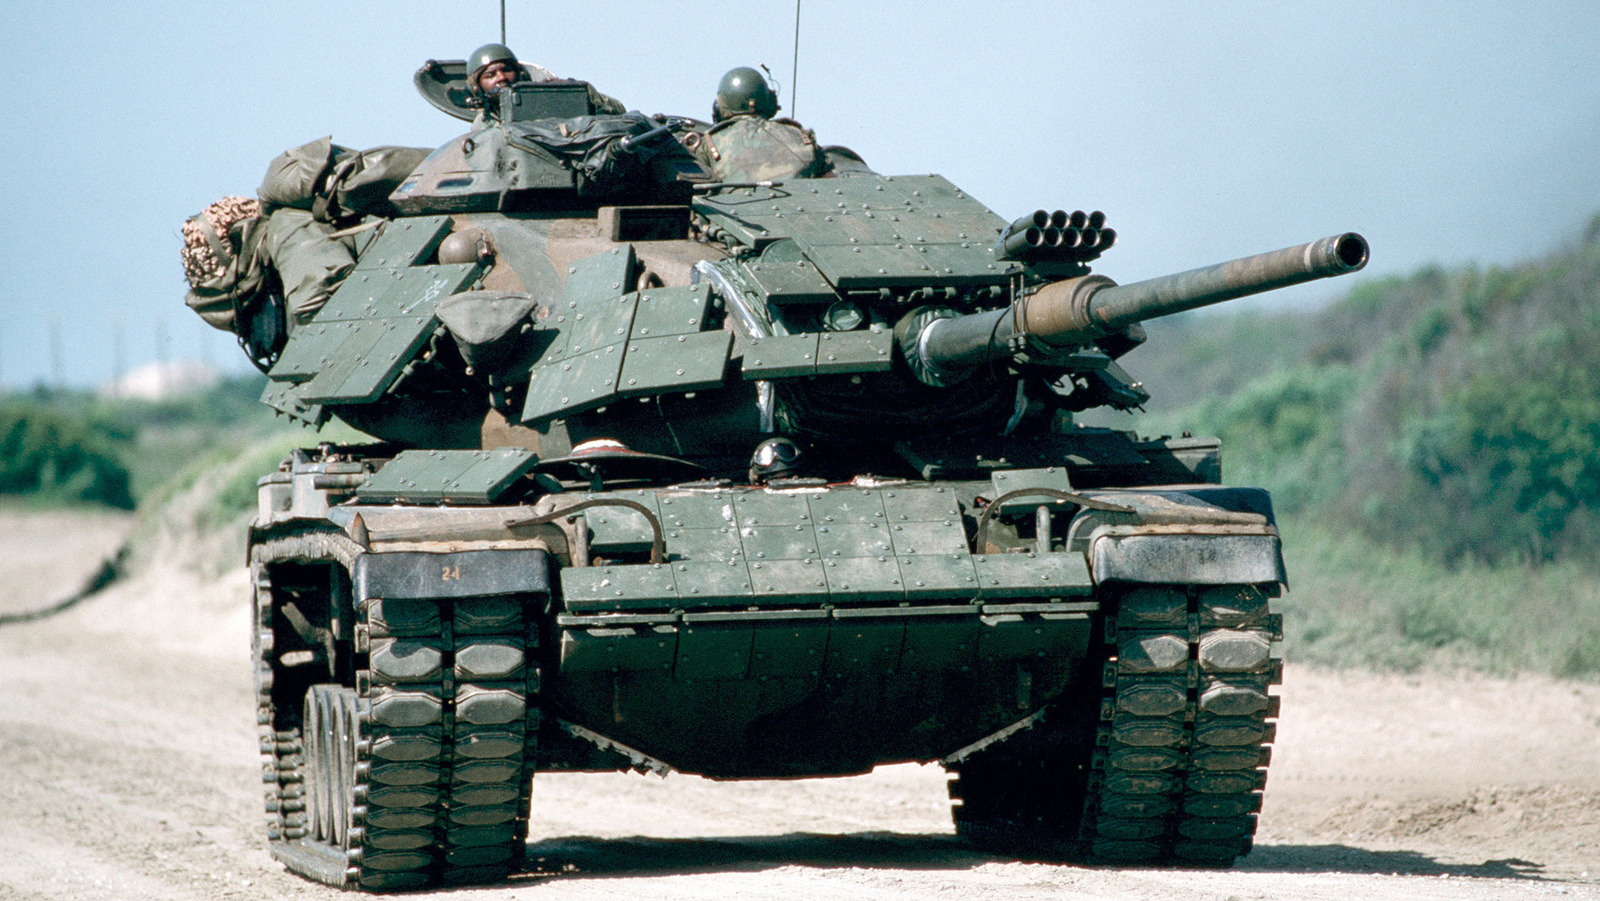 Over 60 Years of Exceptional Service: The Unbeatable U.S. Tank